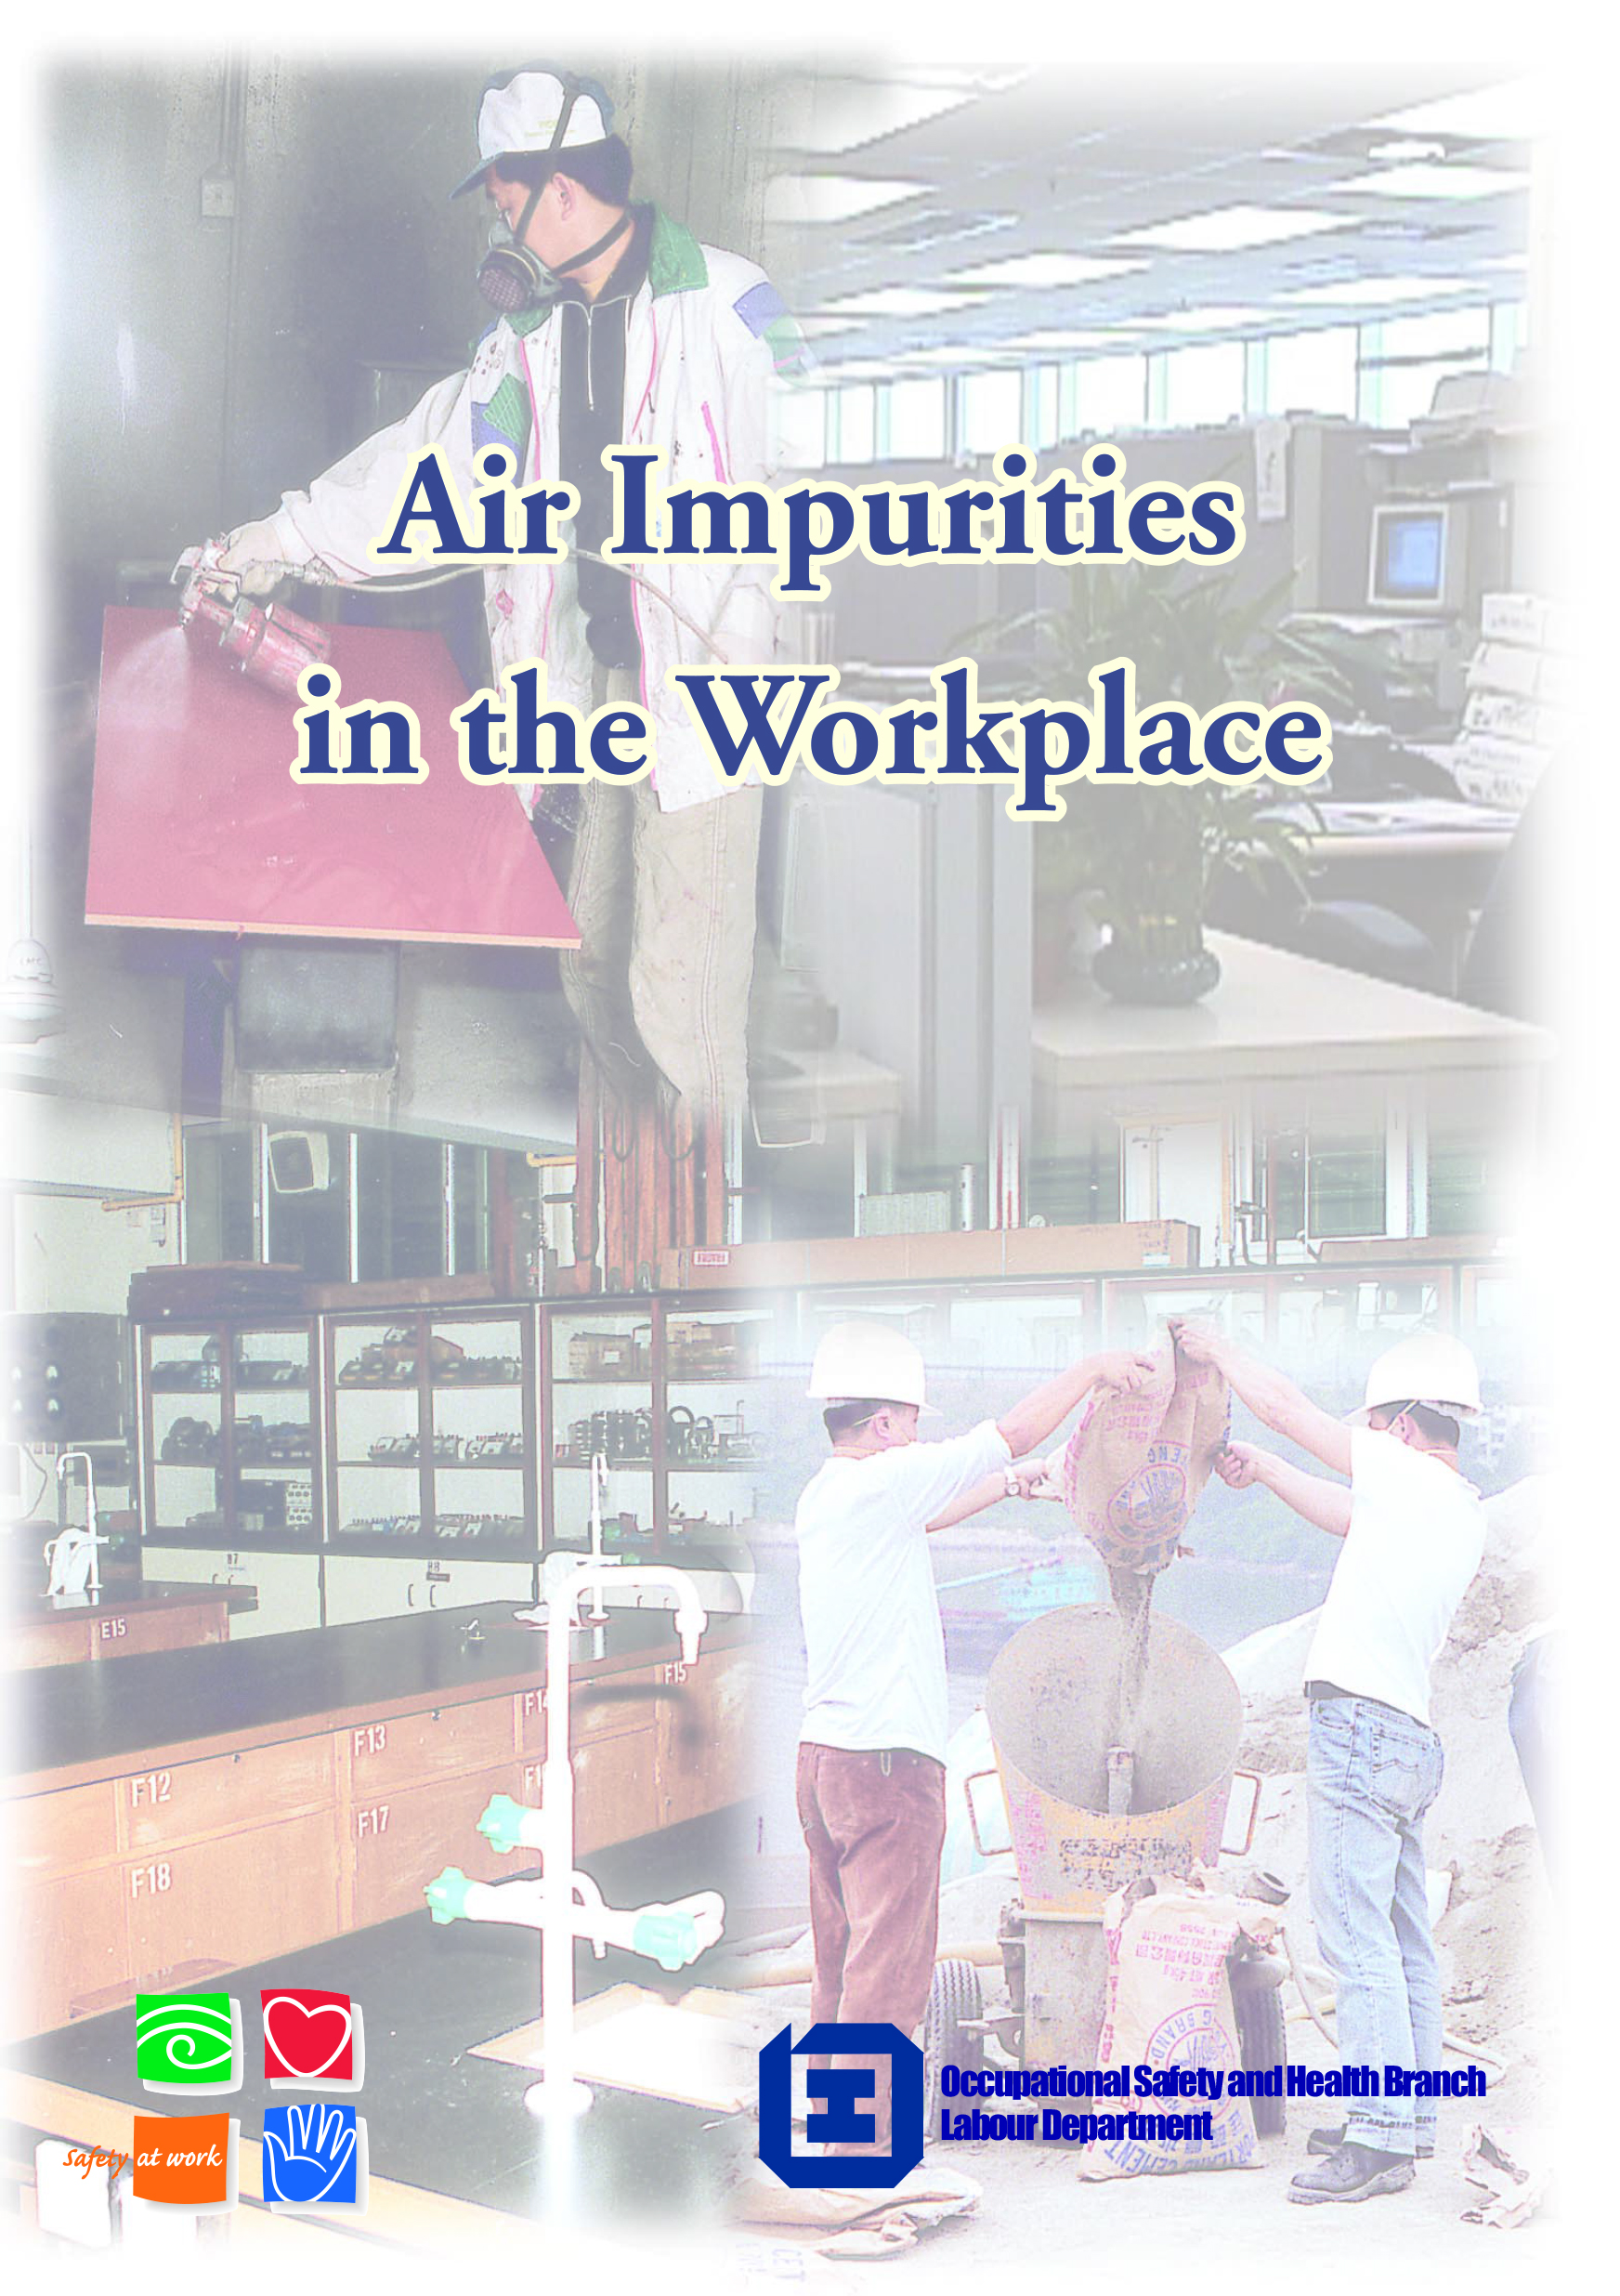 Air Impurities in the Workplace (published by the Labour Department)